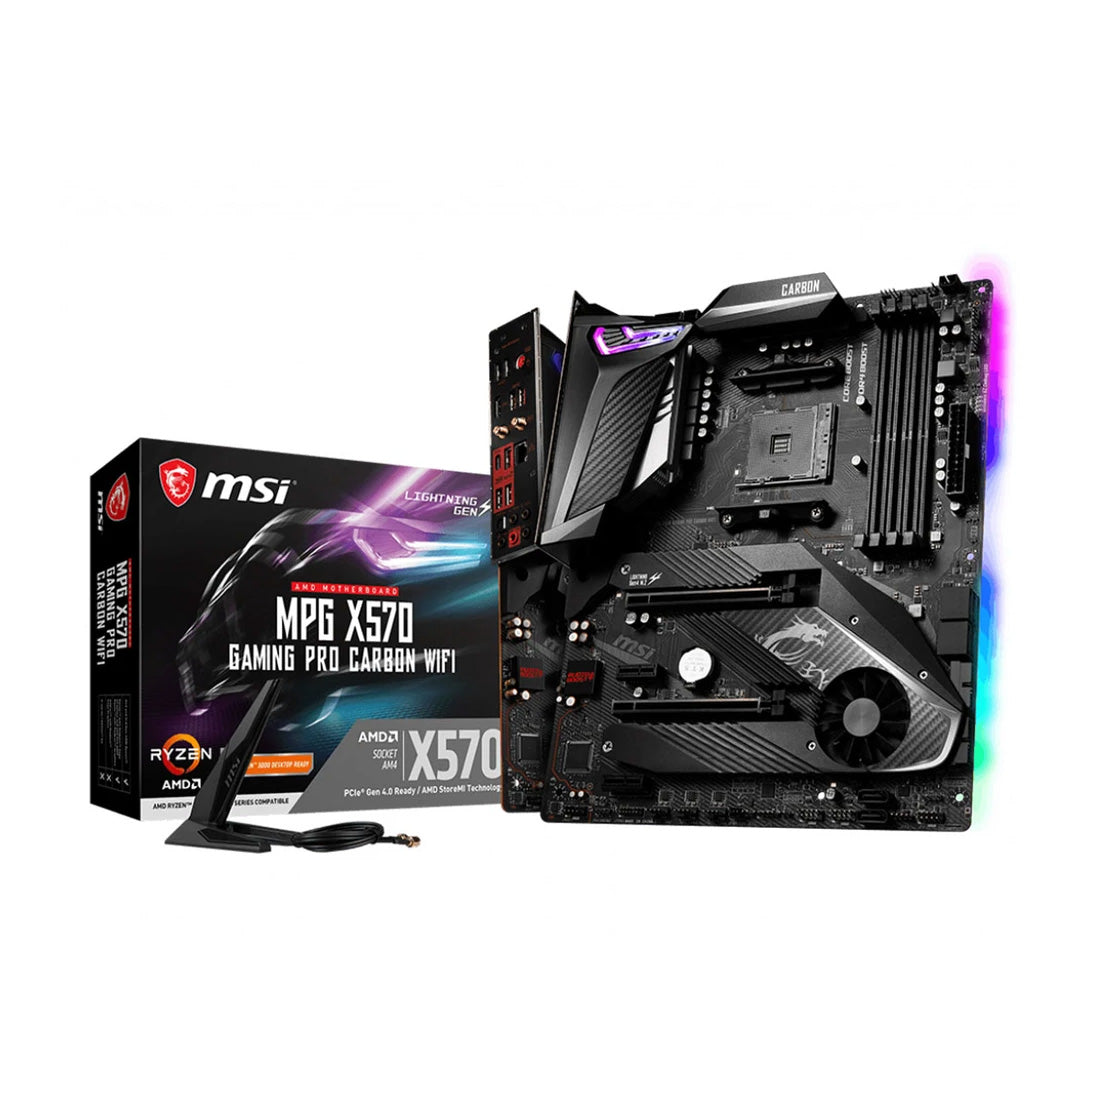 MSI MPG X570 Gaming PRO Carbon WiFi AMD AM4 Socket DDR4 PCIe 4 ATX Motherboard